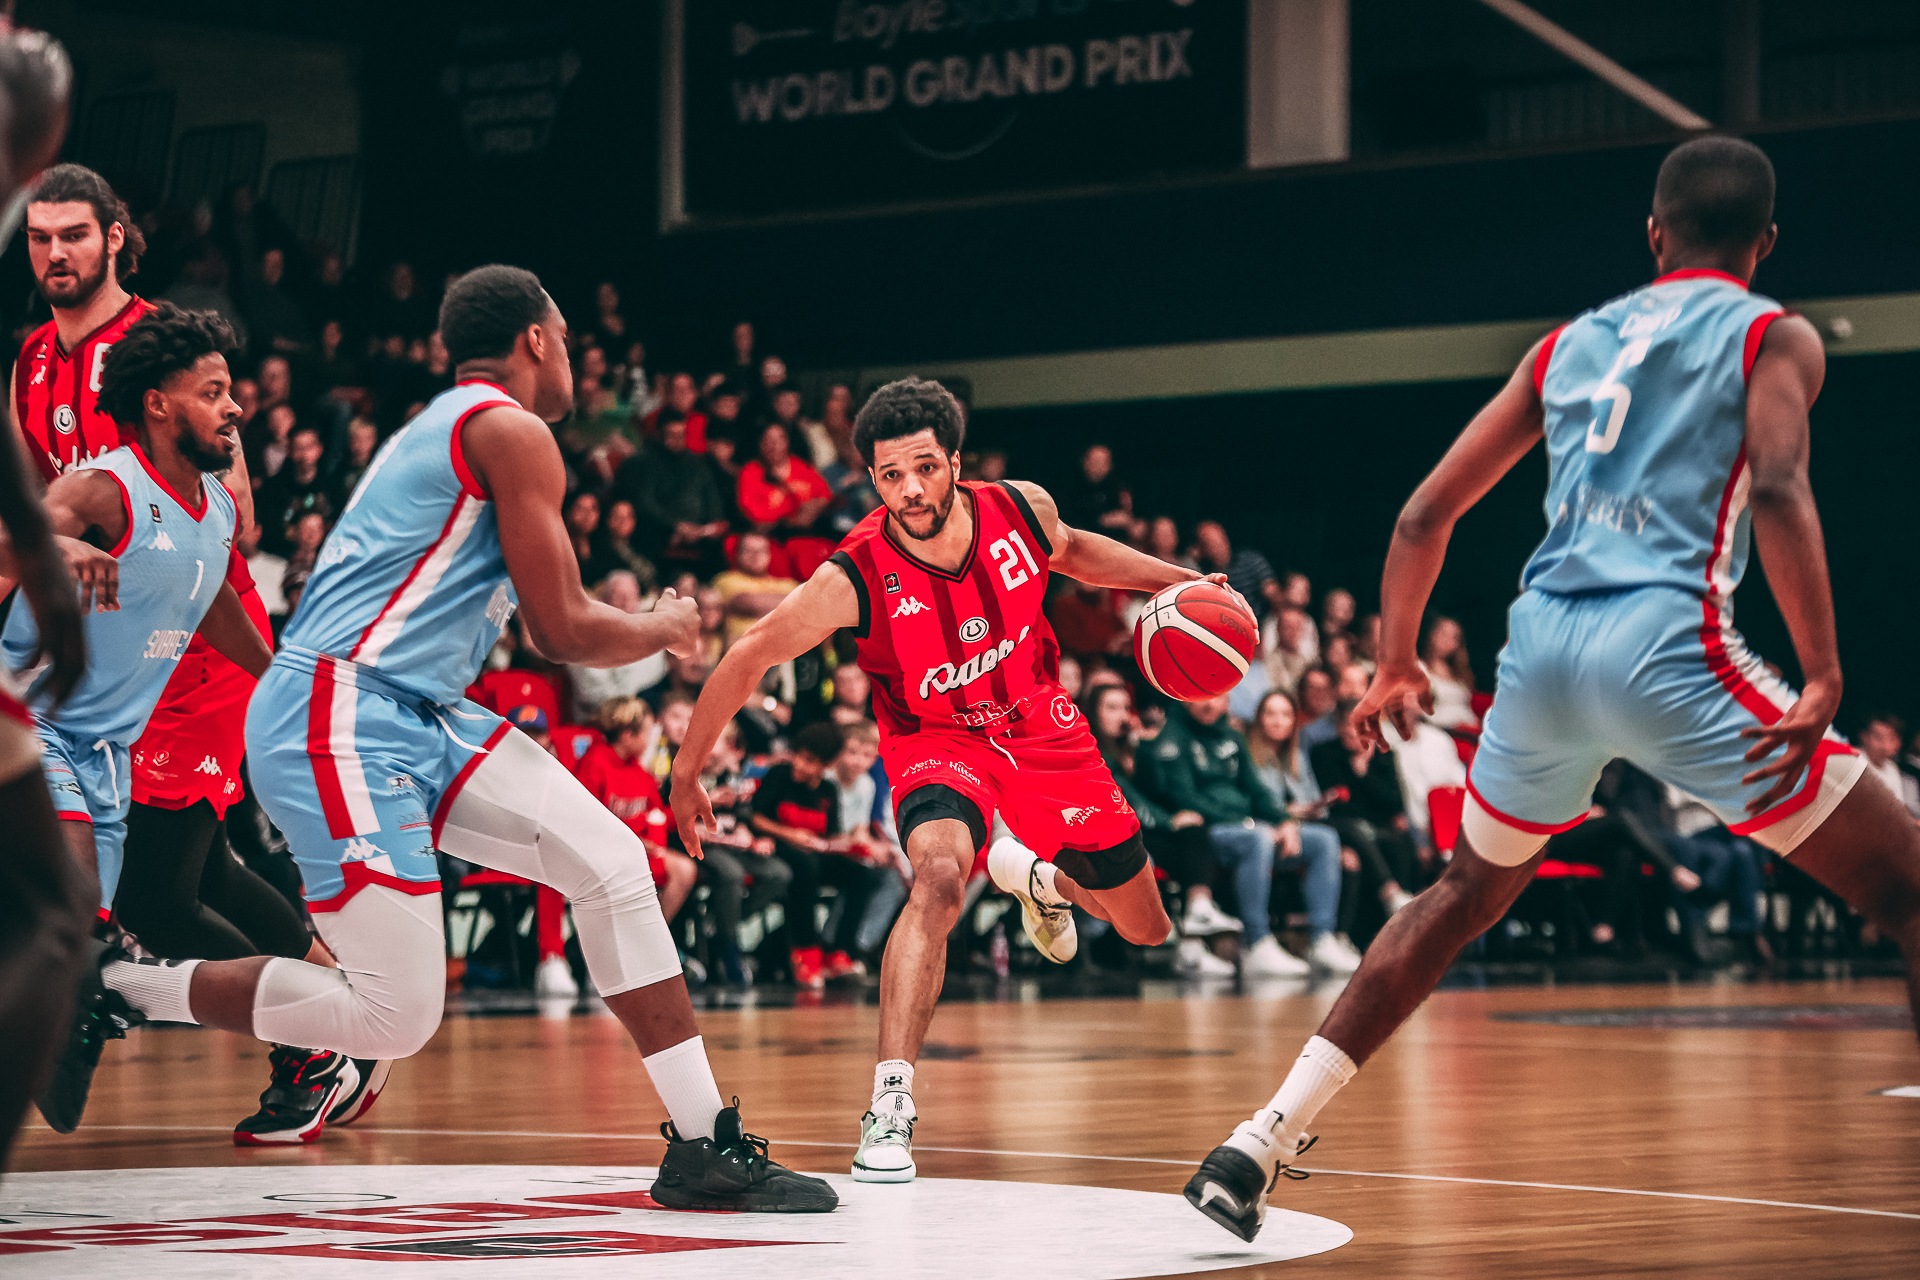 BBL Championship Preview: Riders at Flyers